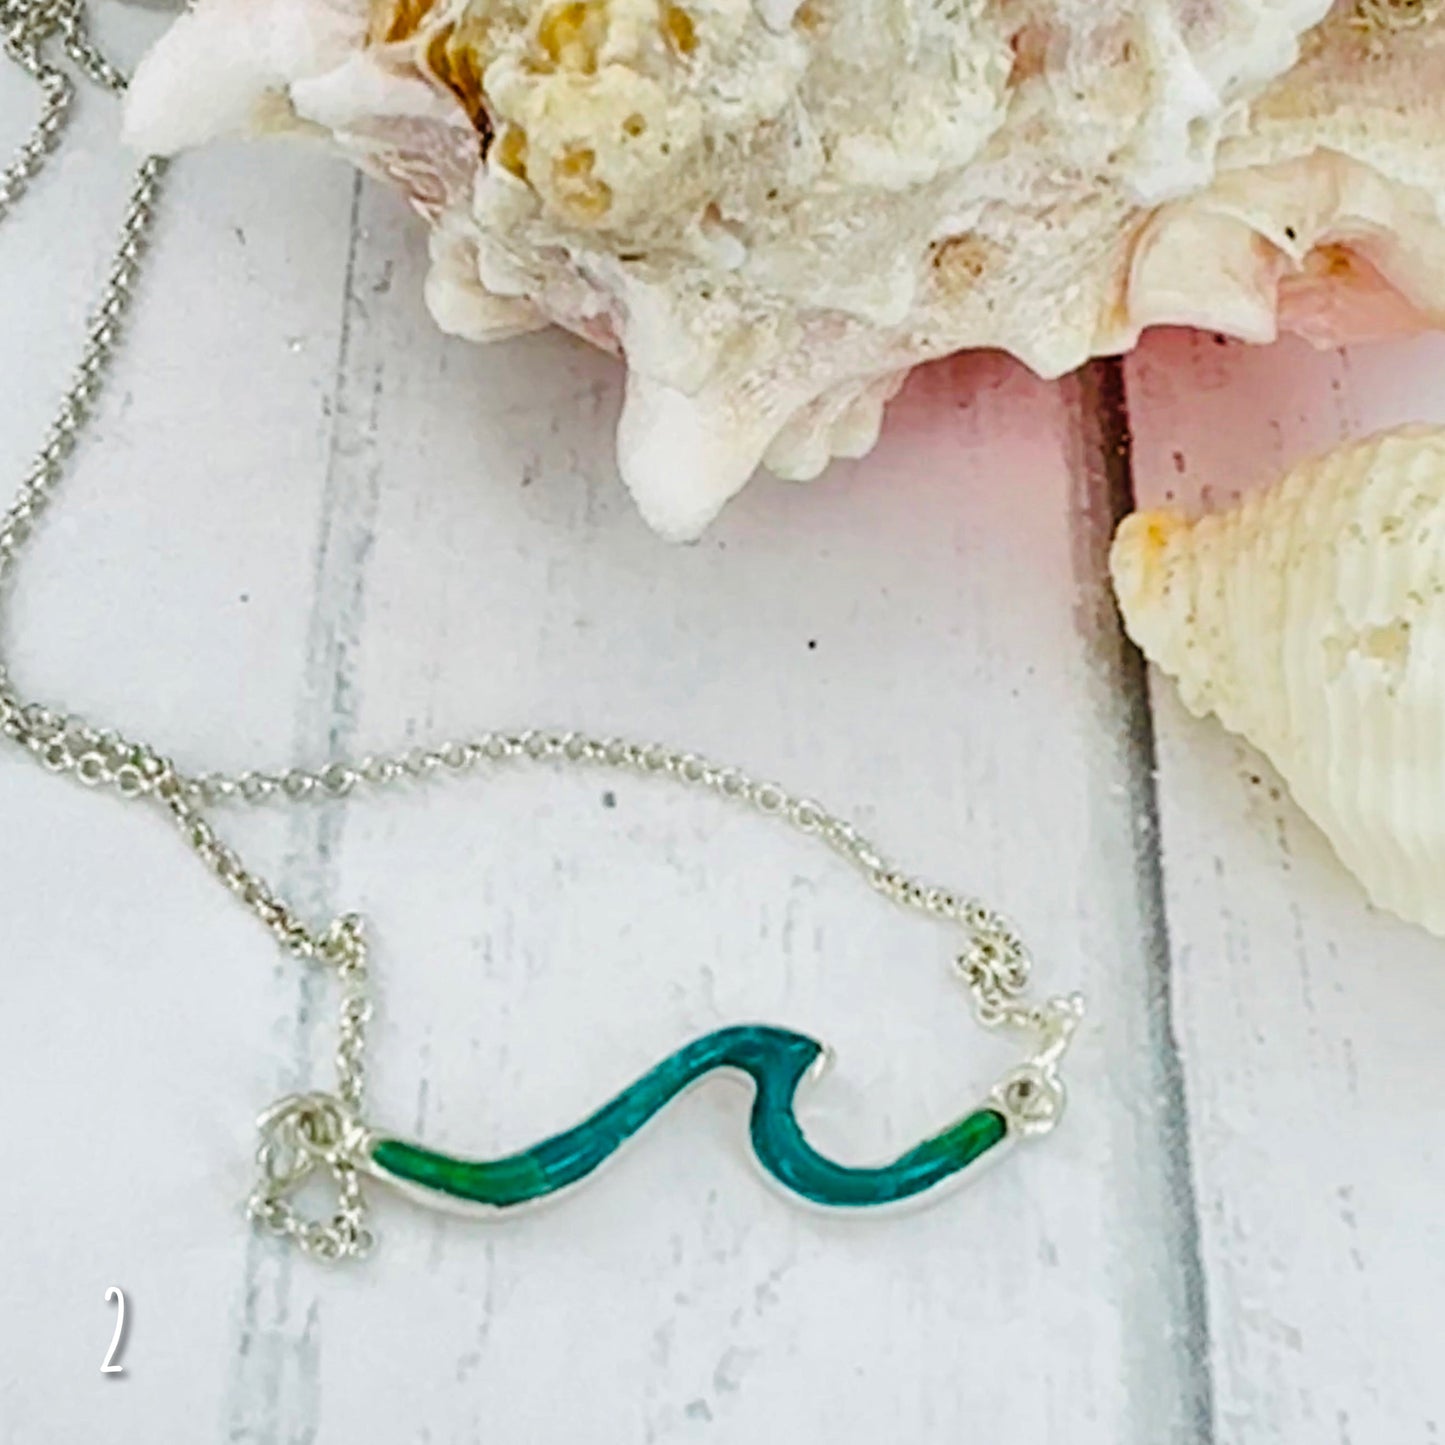 Make Waves {turquoise} Necklace